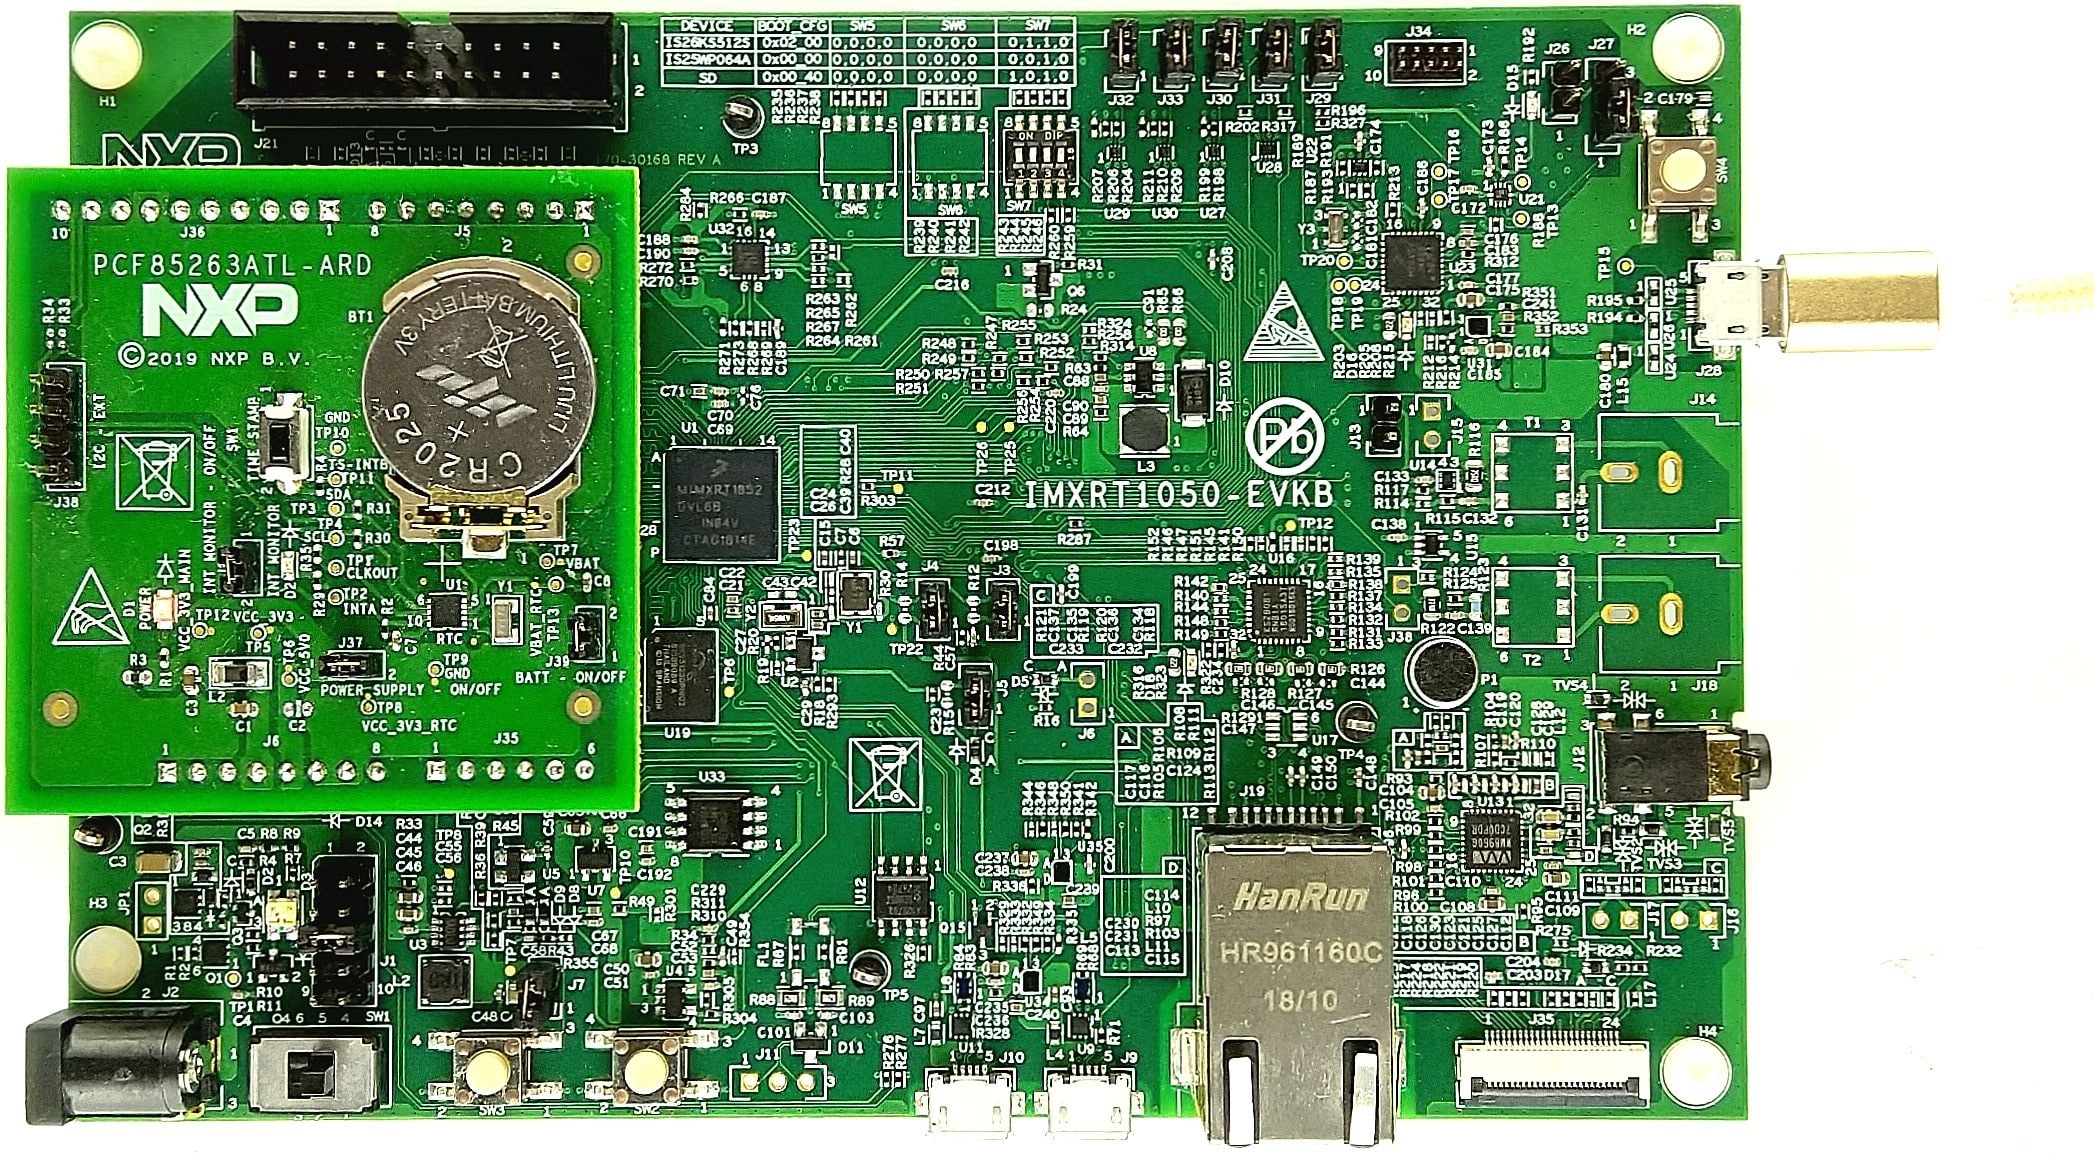 Figure 2. The assembly PCF85263ATL-ARD daughter board / IMXRT1050 EVK board operation